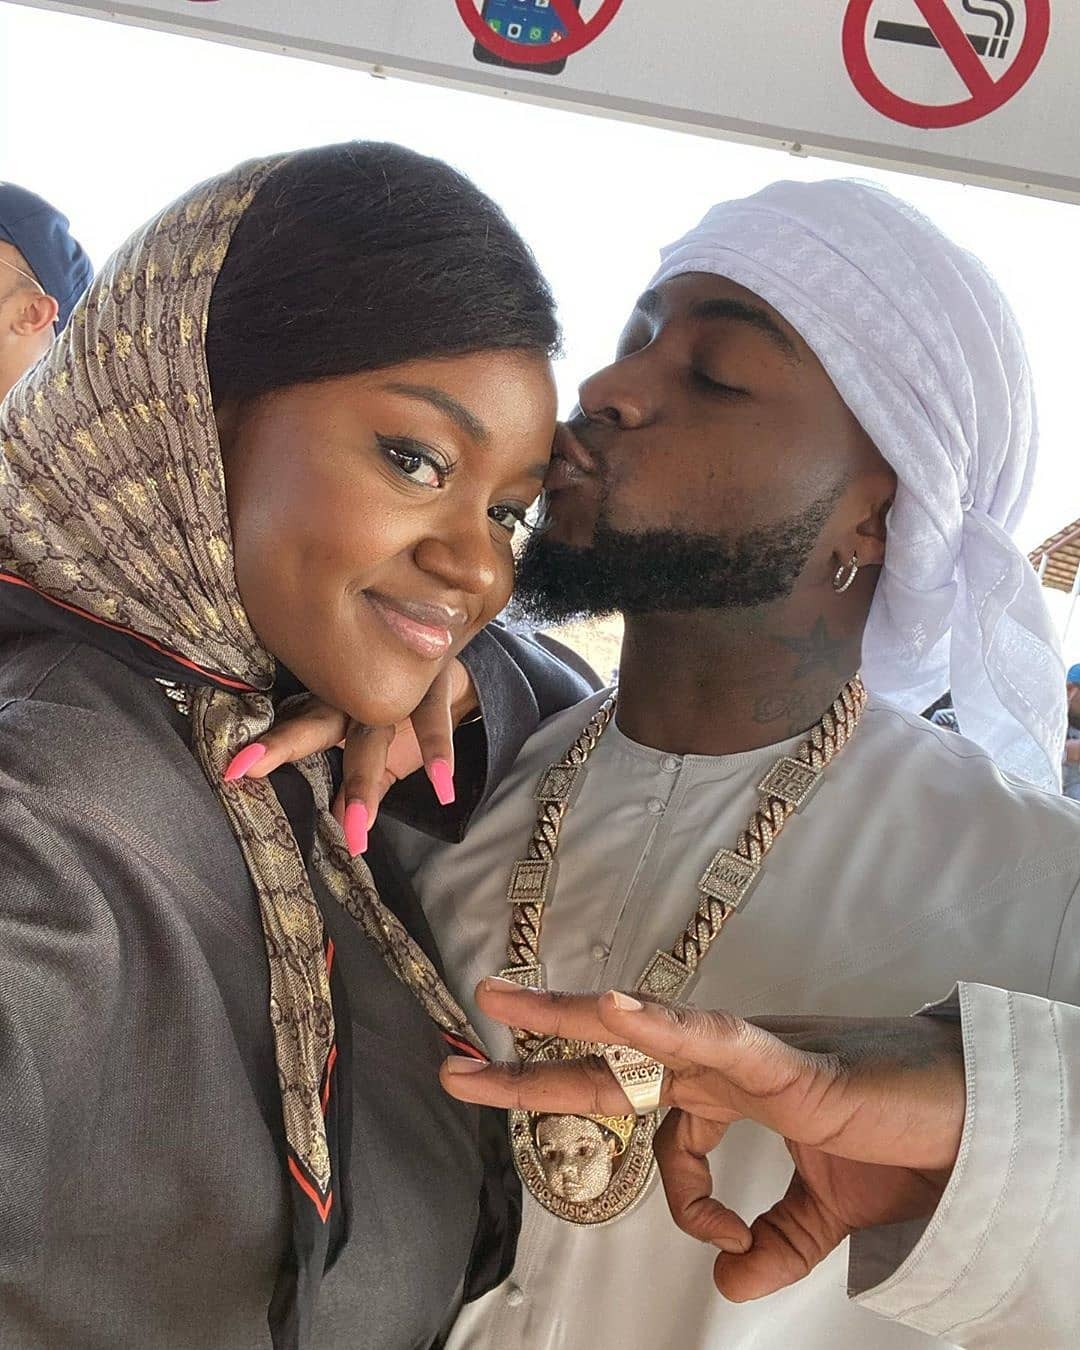 Davido and Chioma dressed in Arabia outfit